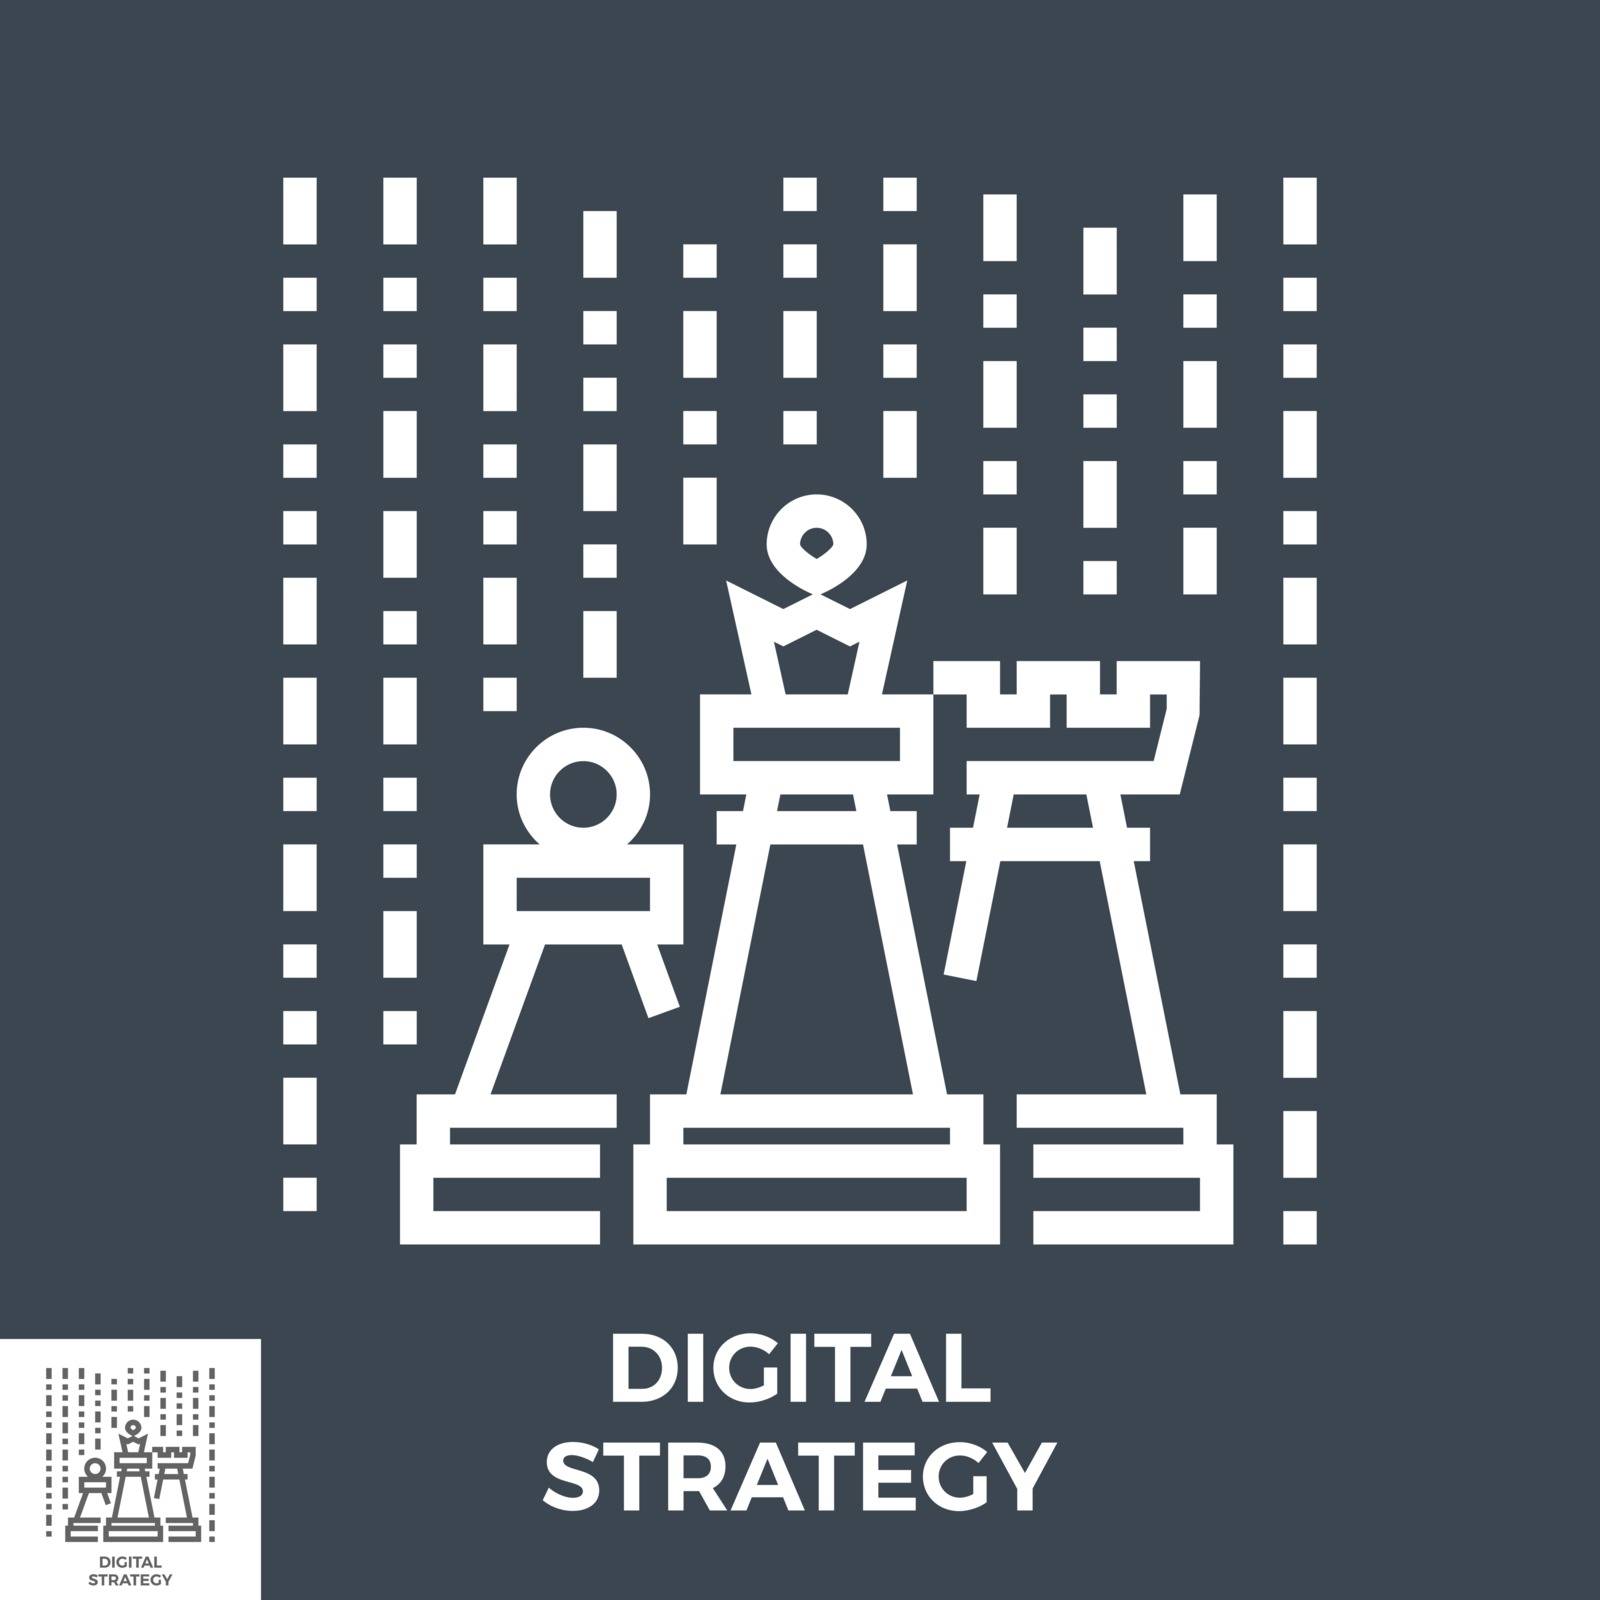 Digital Strategy Thin Line Vector Icon Isolated on the Black Background.